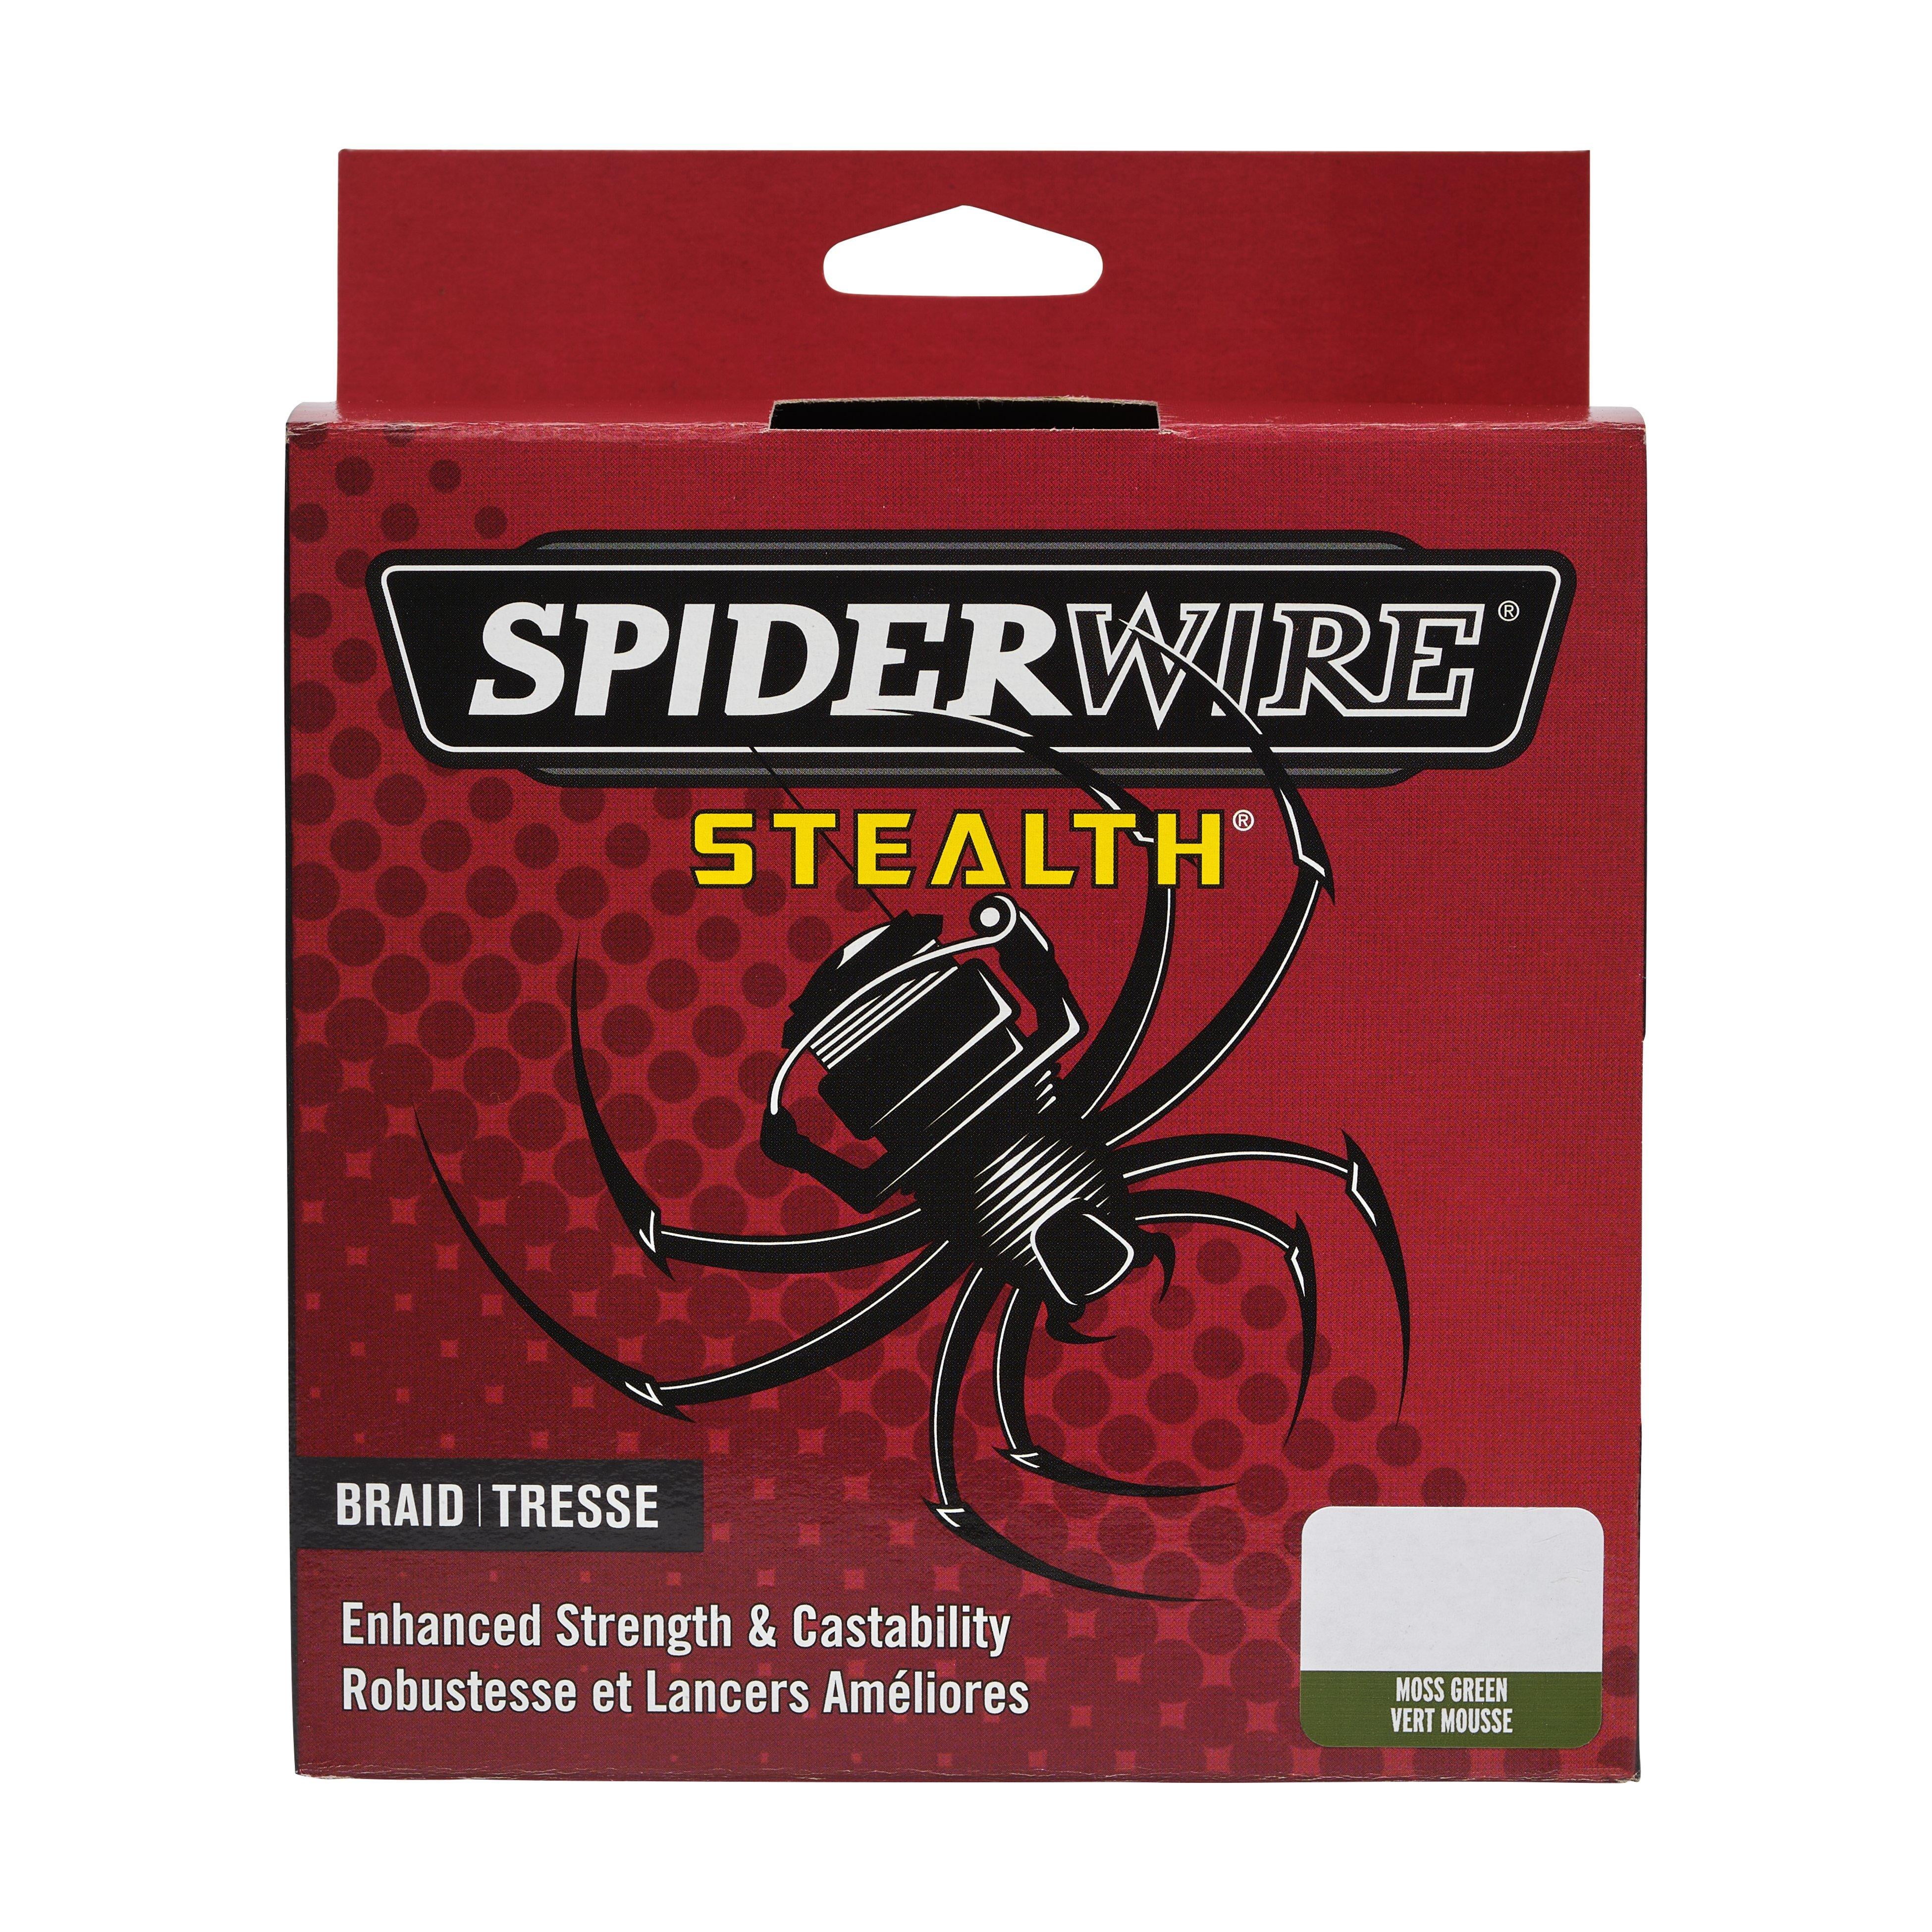 SpiderWire Stealth 50 lb Braid Fishing Line, Moss Philippines